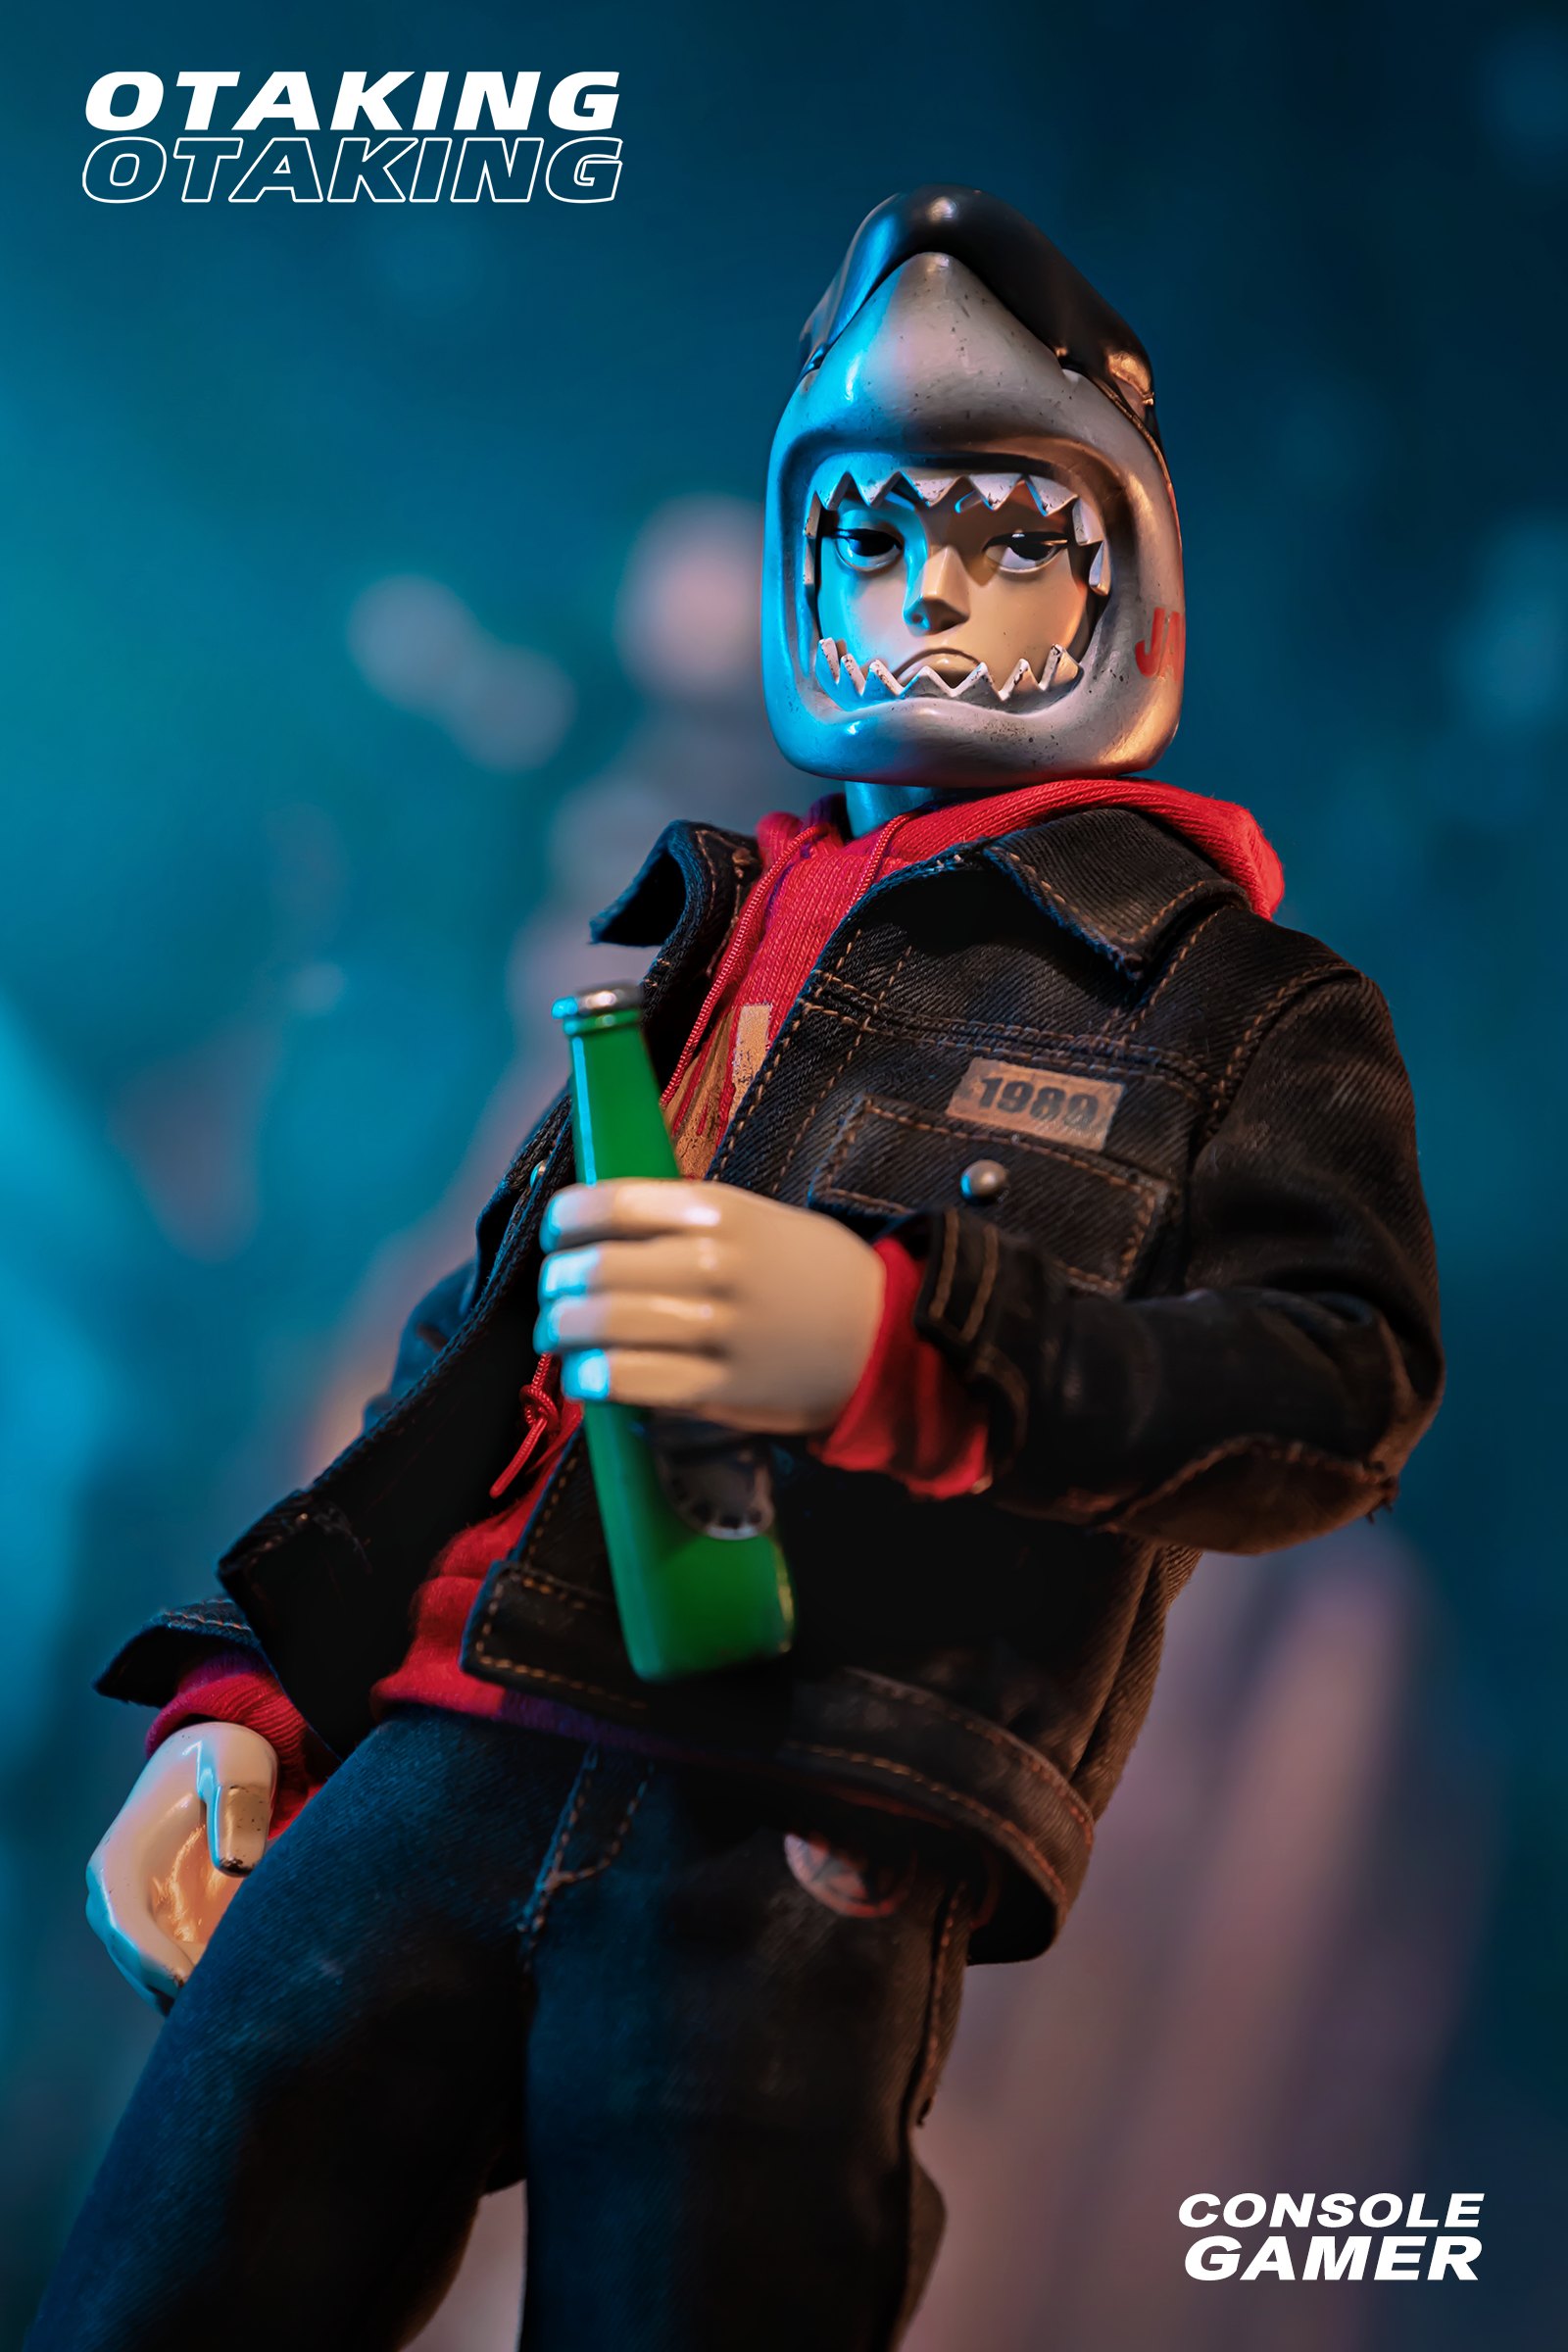 A toy figure holding a bottle, part of OTAKING - Console Gamer set with arcade head screen and various accessories.